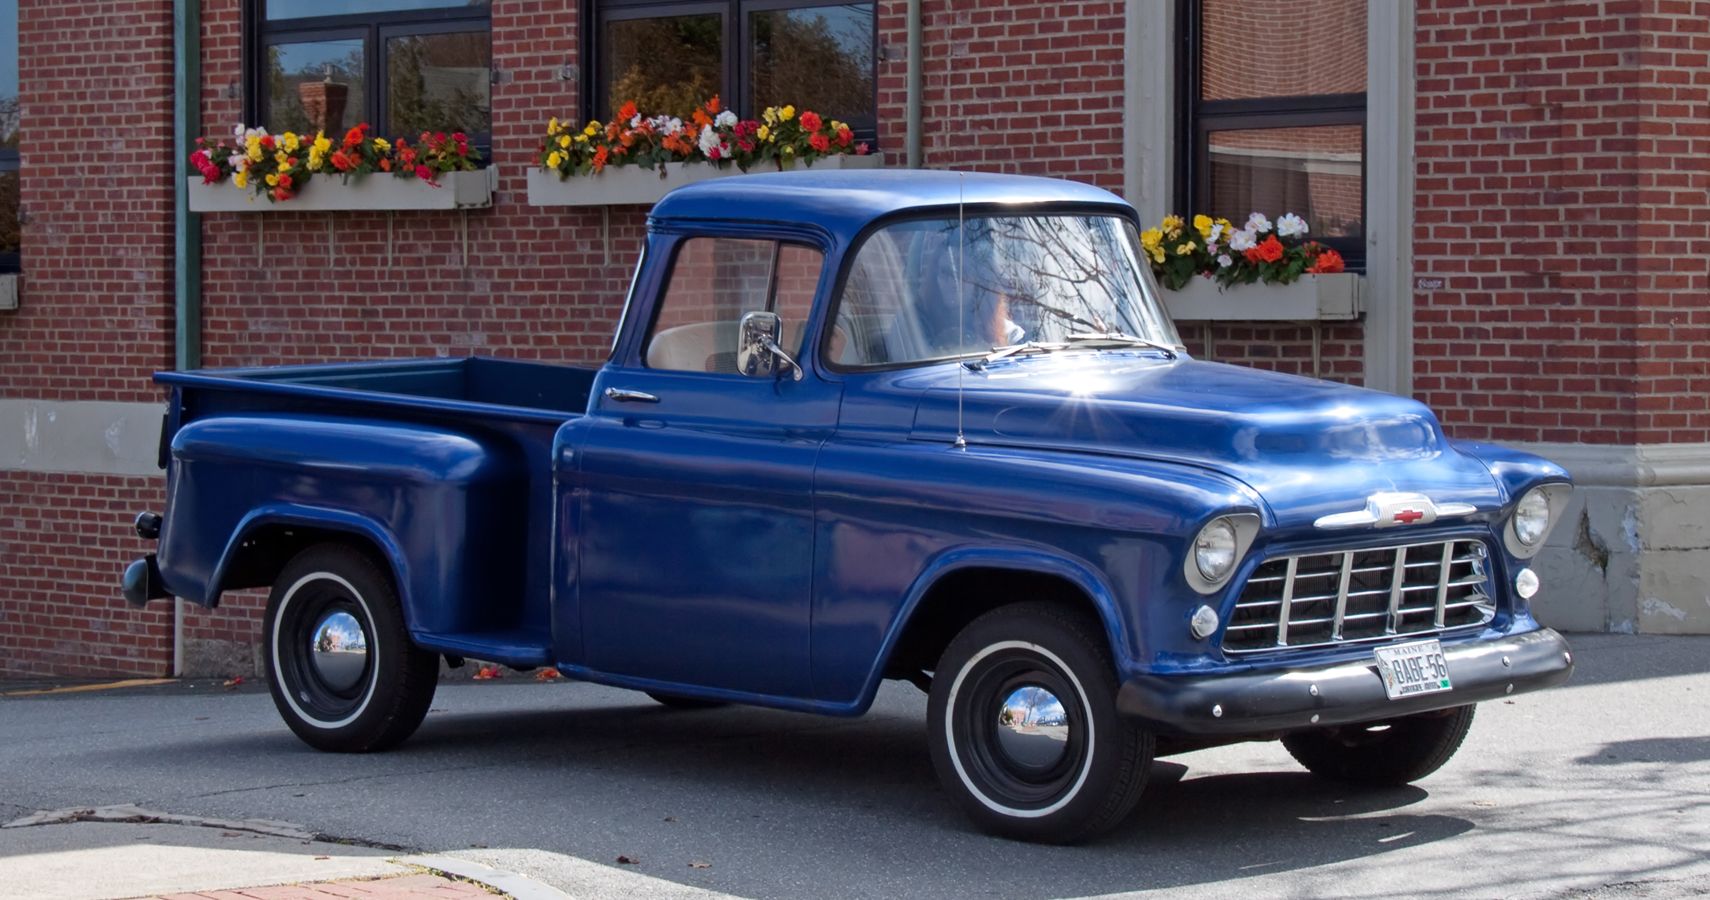 The Task Force Pickups Were Introduced By Chevrolet In 1955 As The Successor To Its Advanced Design Pickups